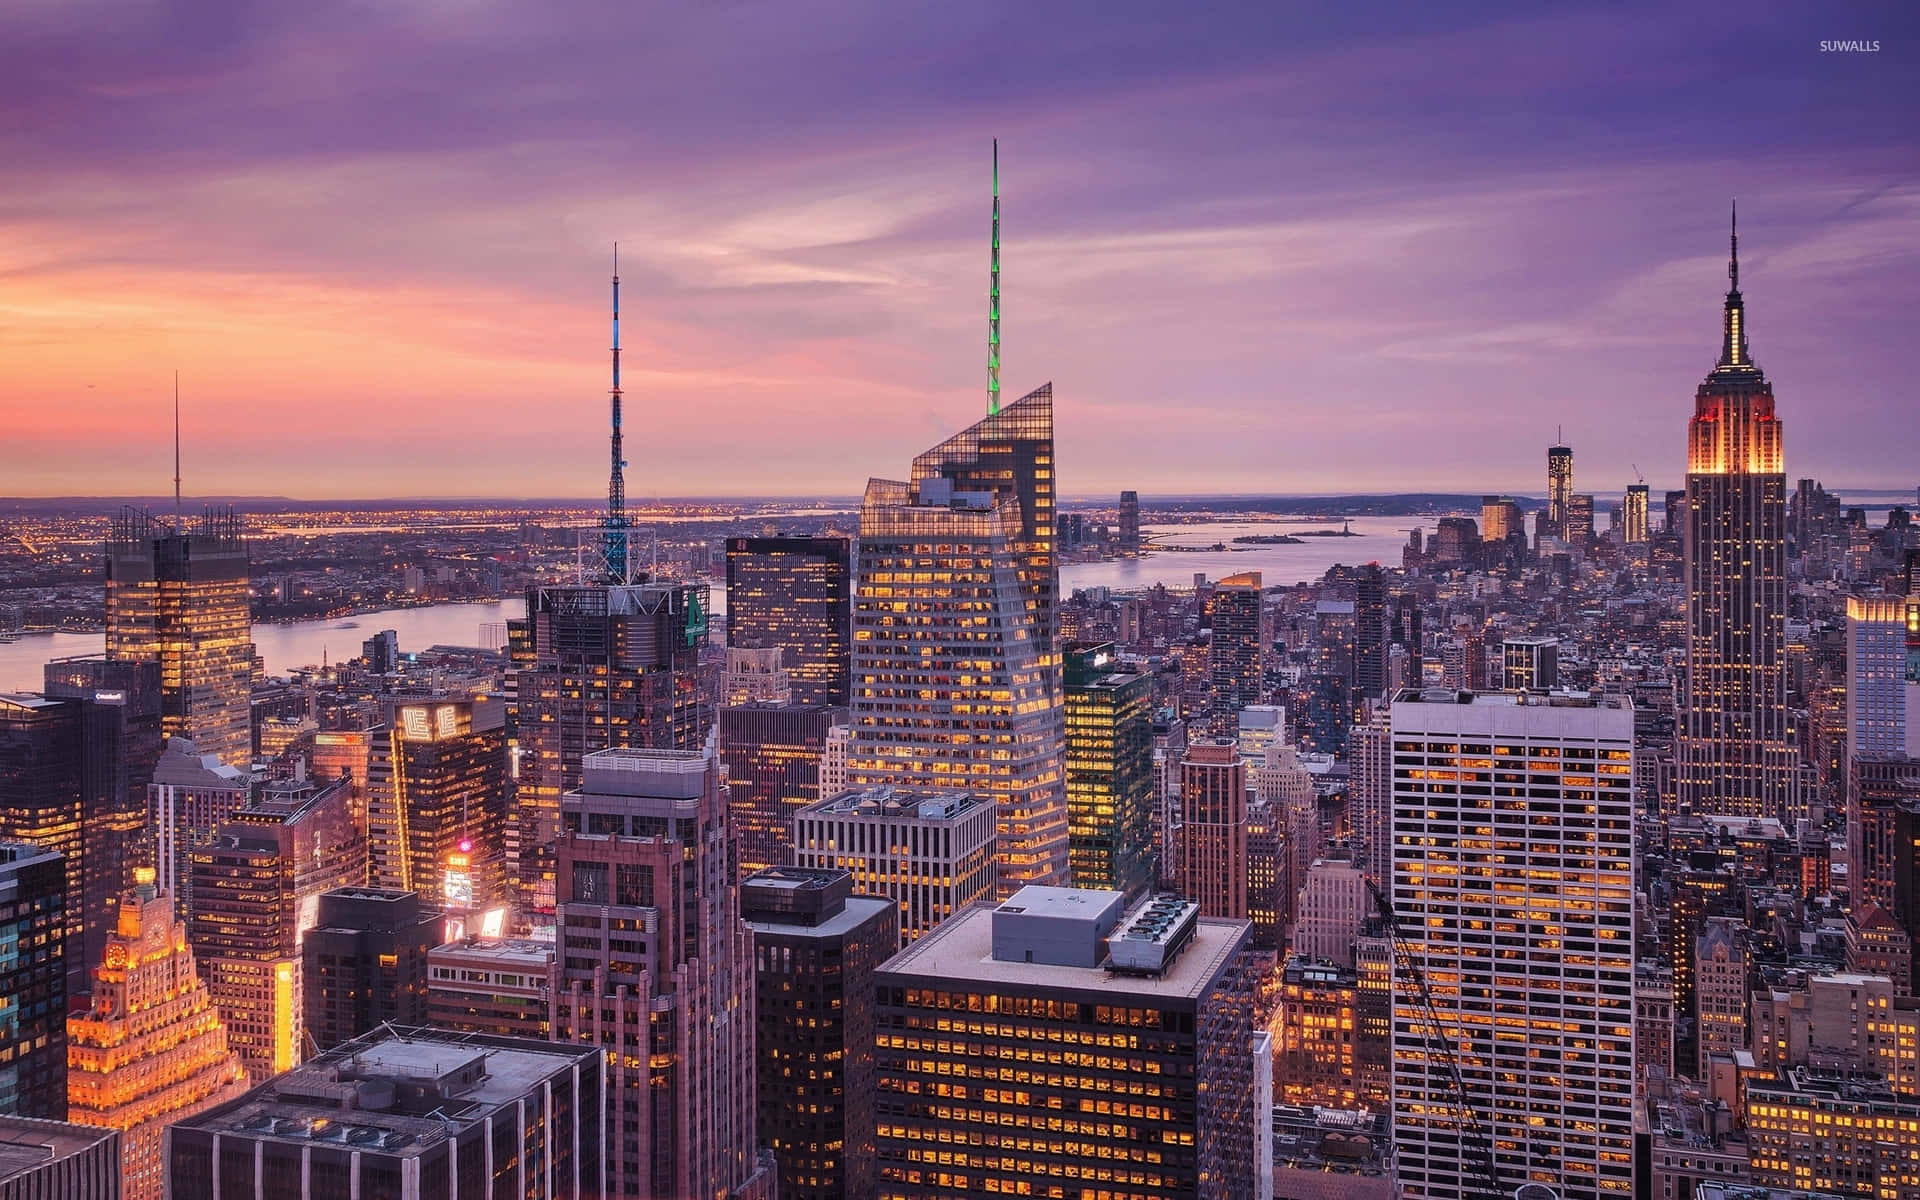 Take a wander around the city of New York